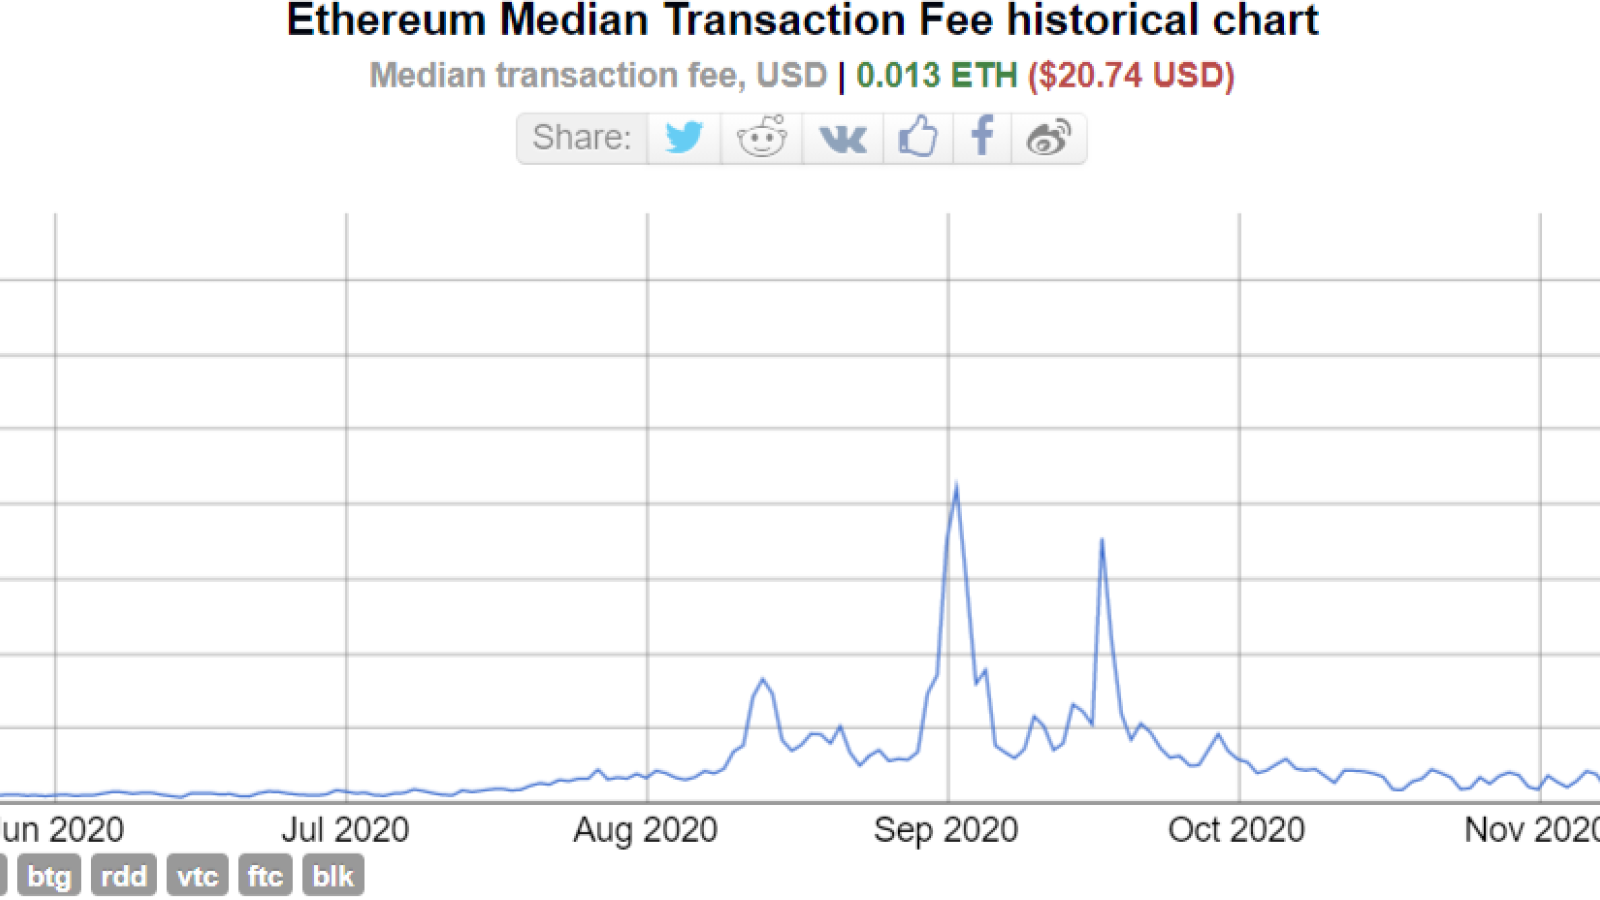 Ethereum transactions fees go through the roof